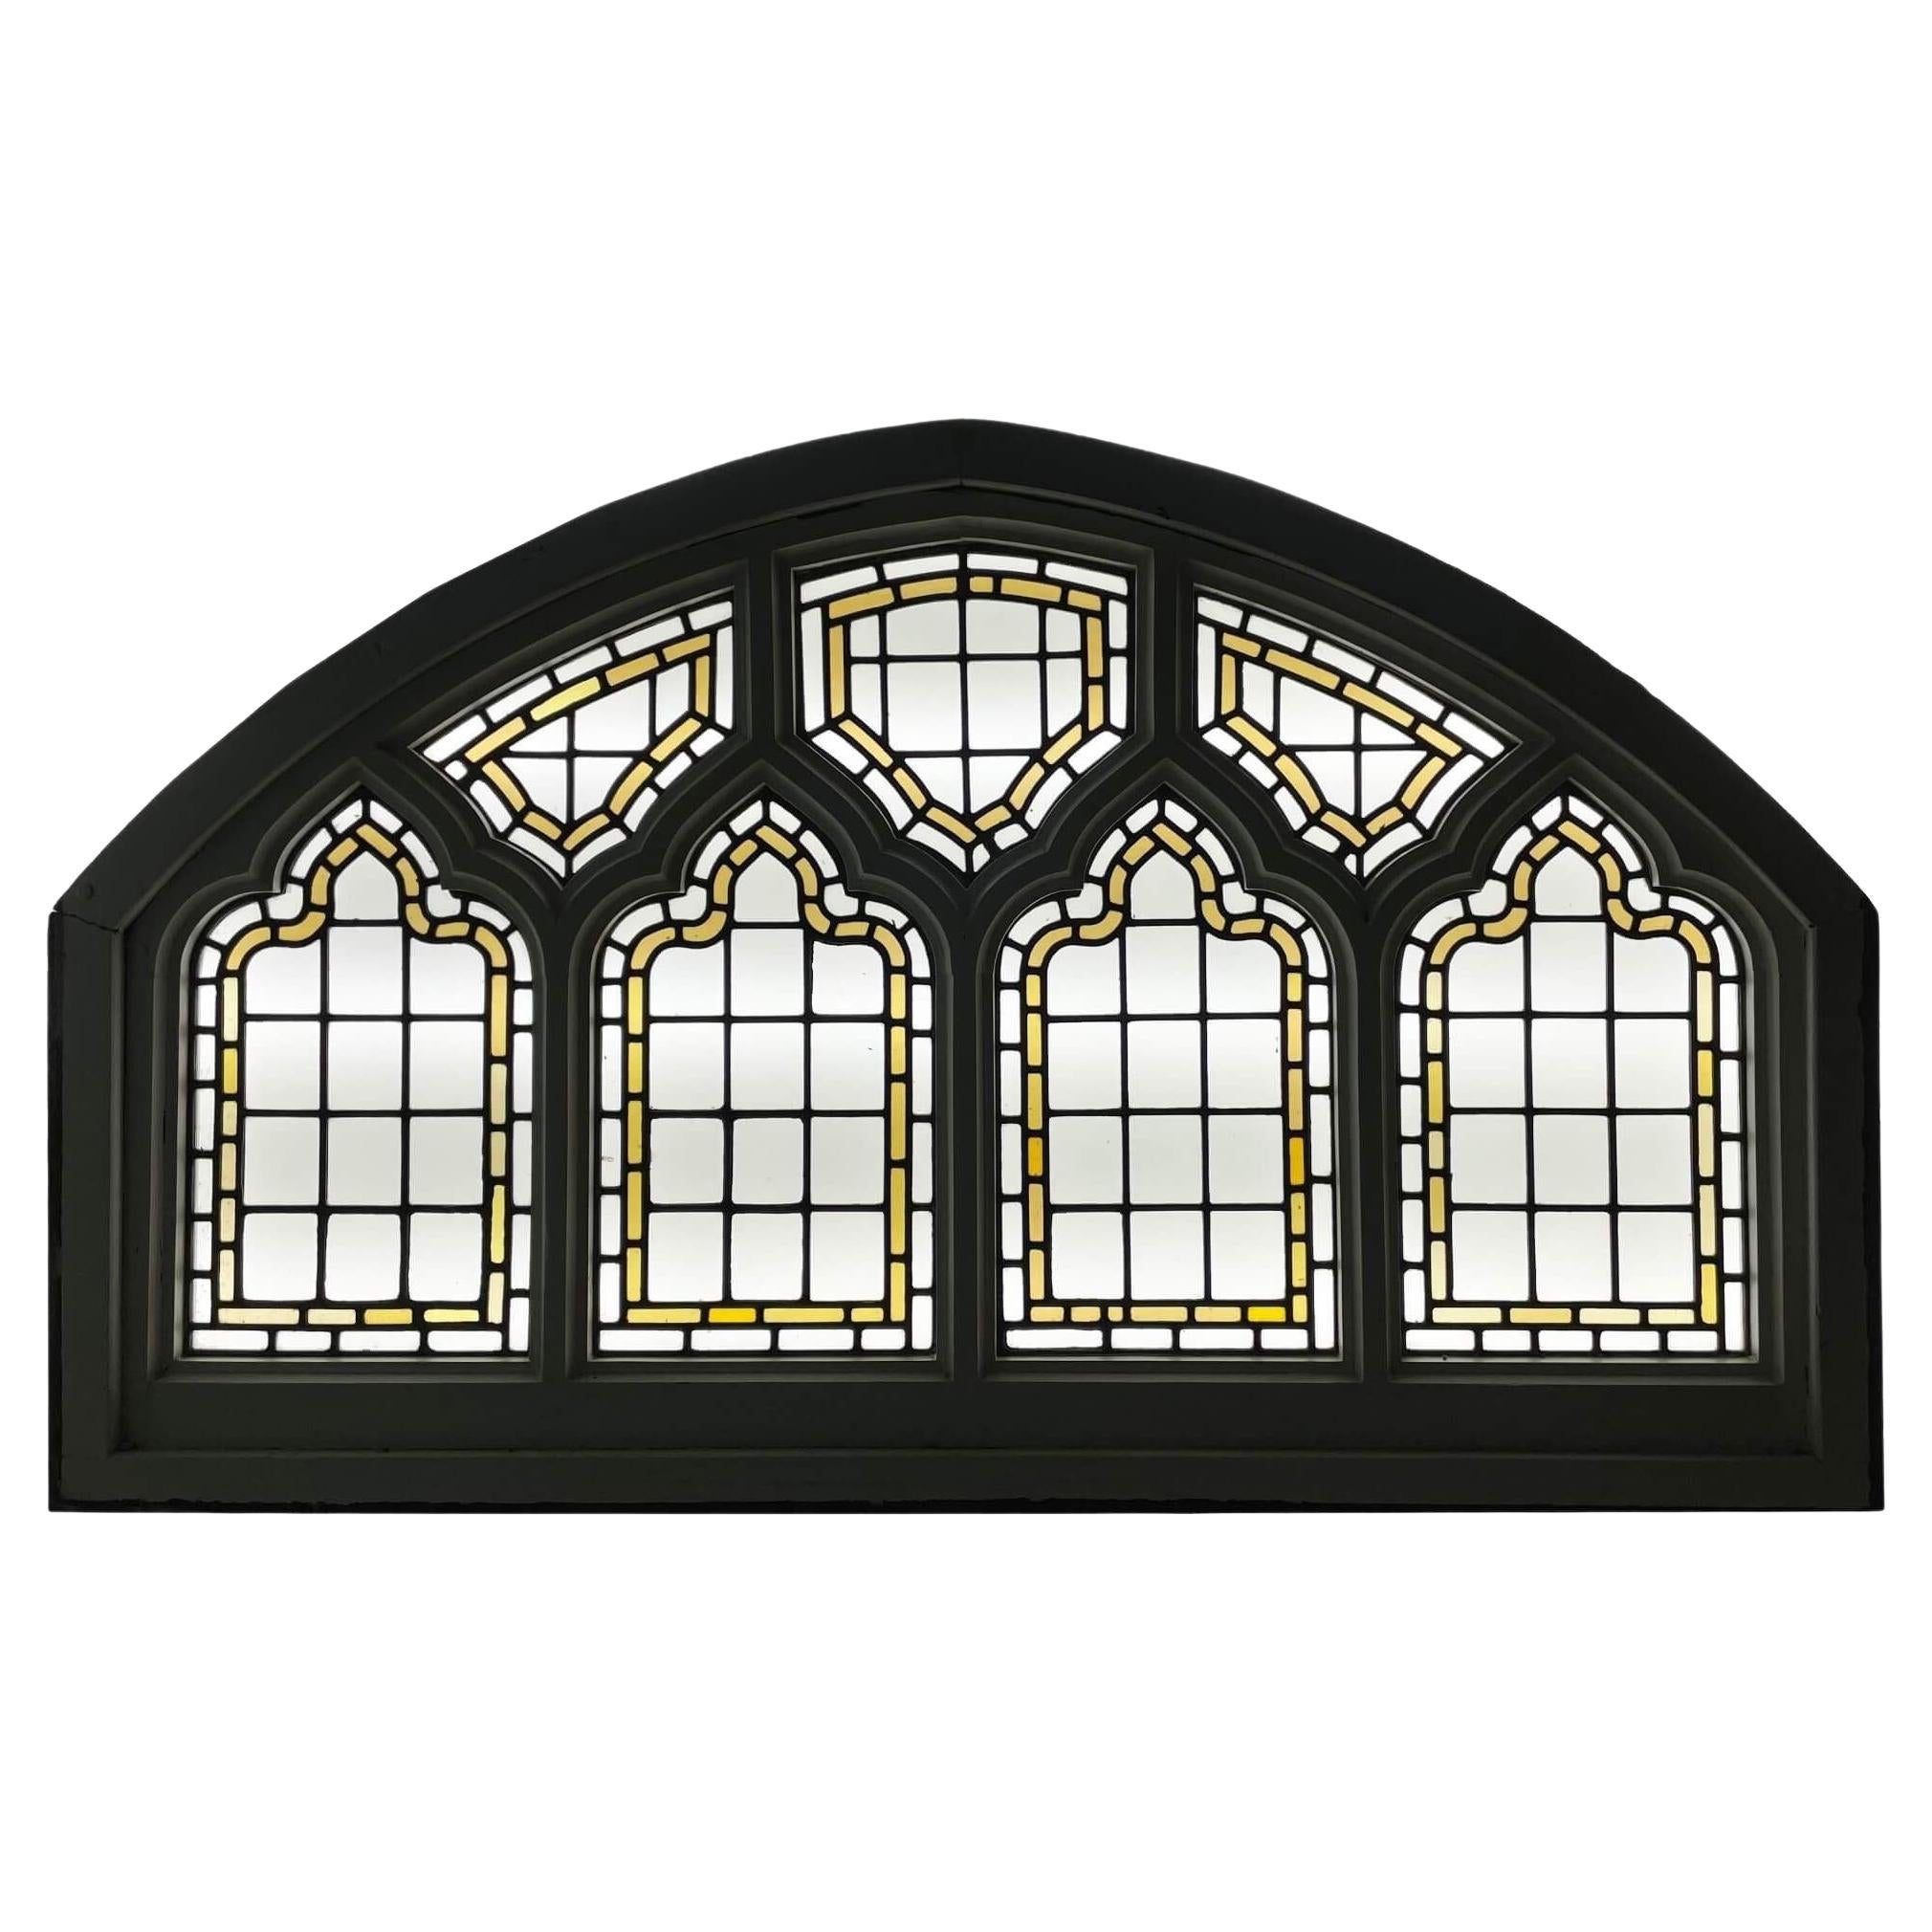 Arched Ecclesiastical Style Stained Glass Window